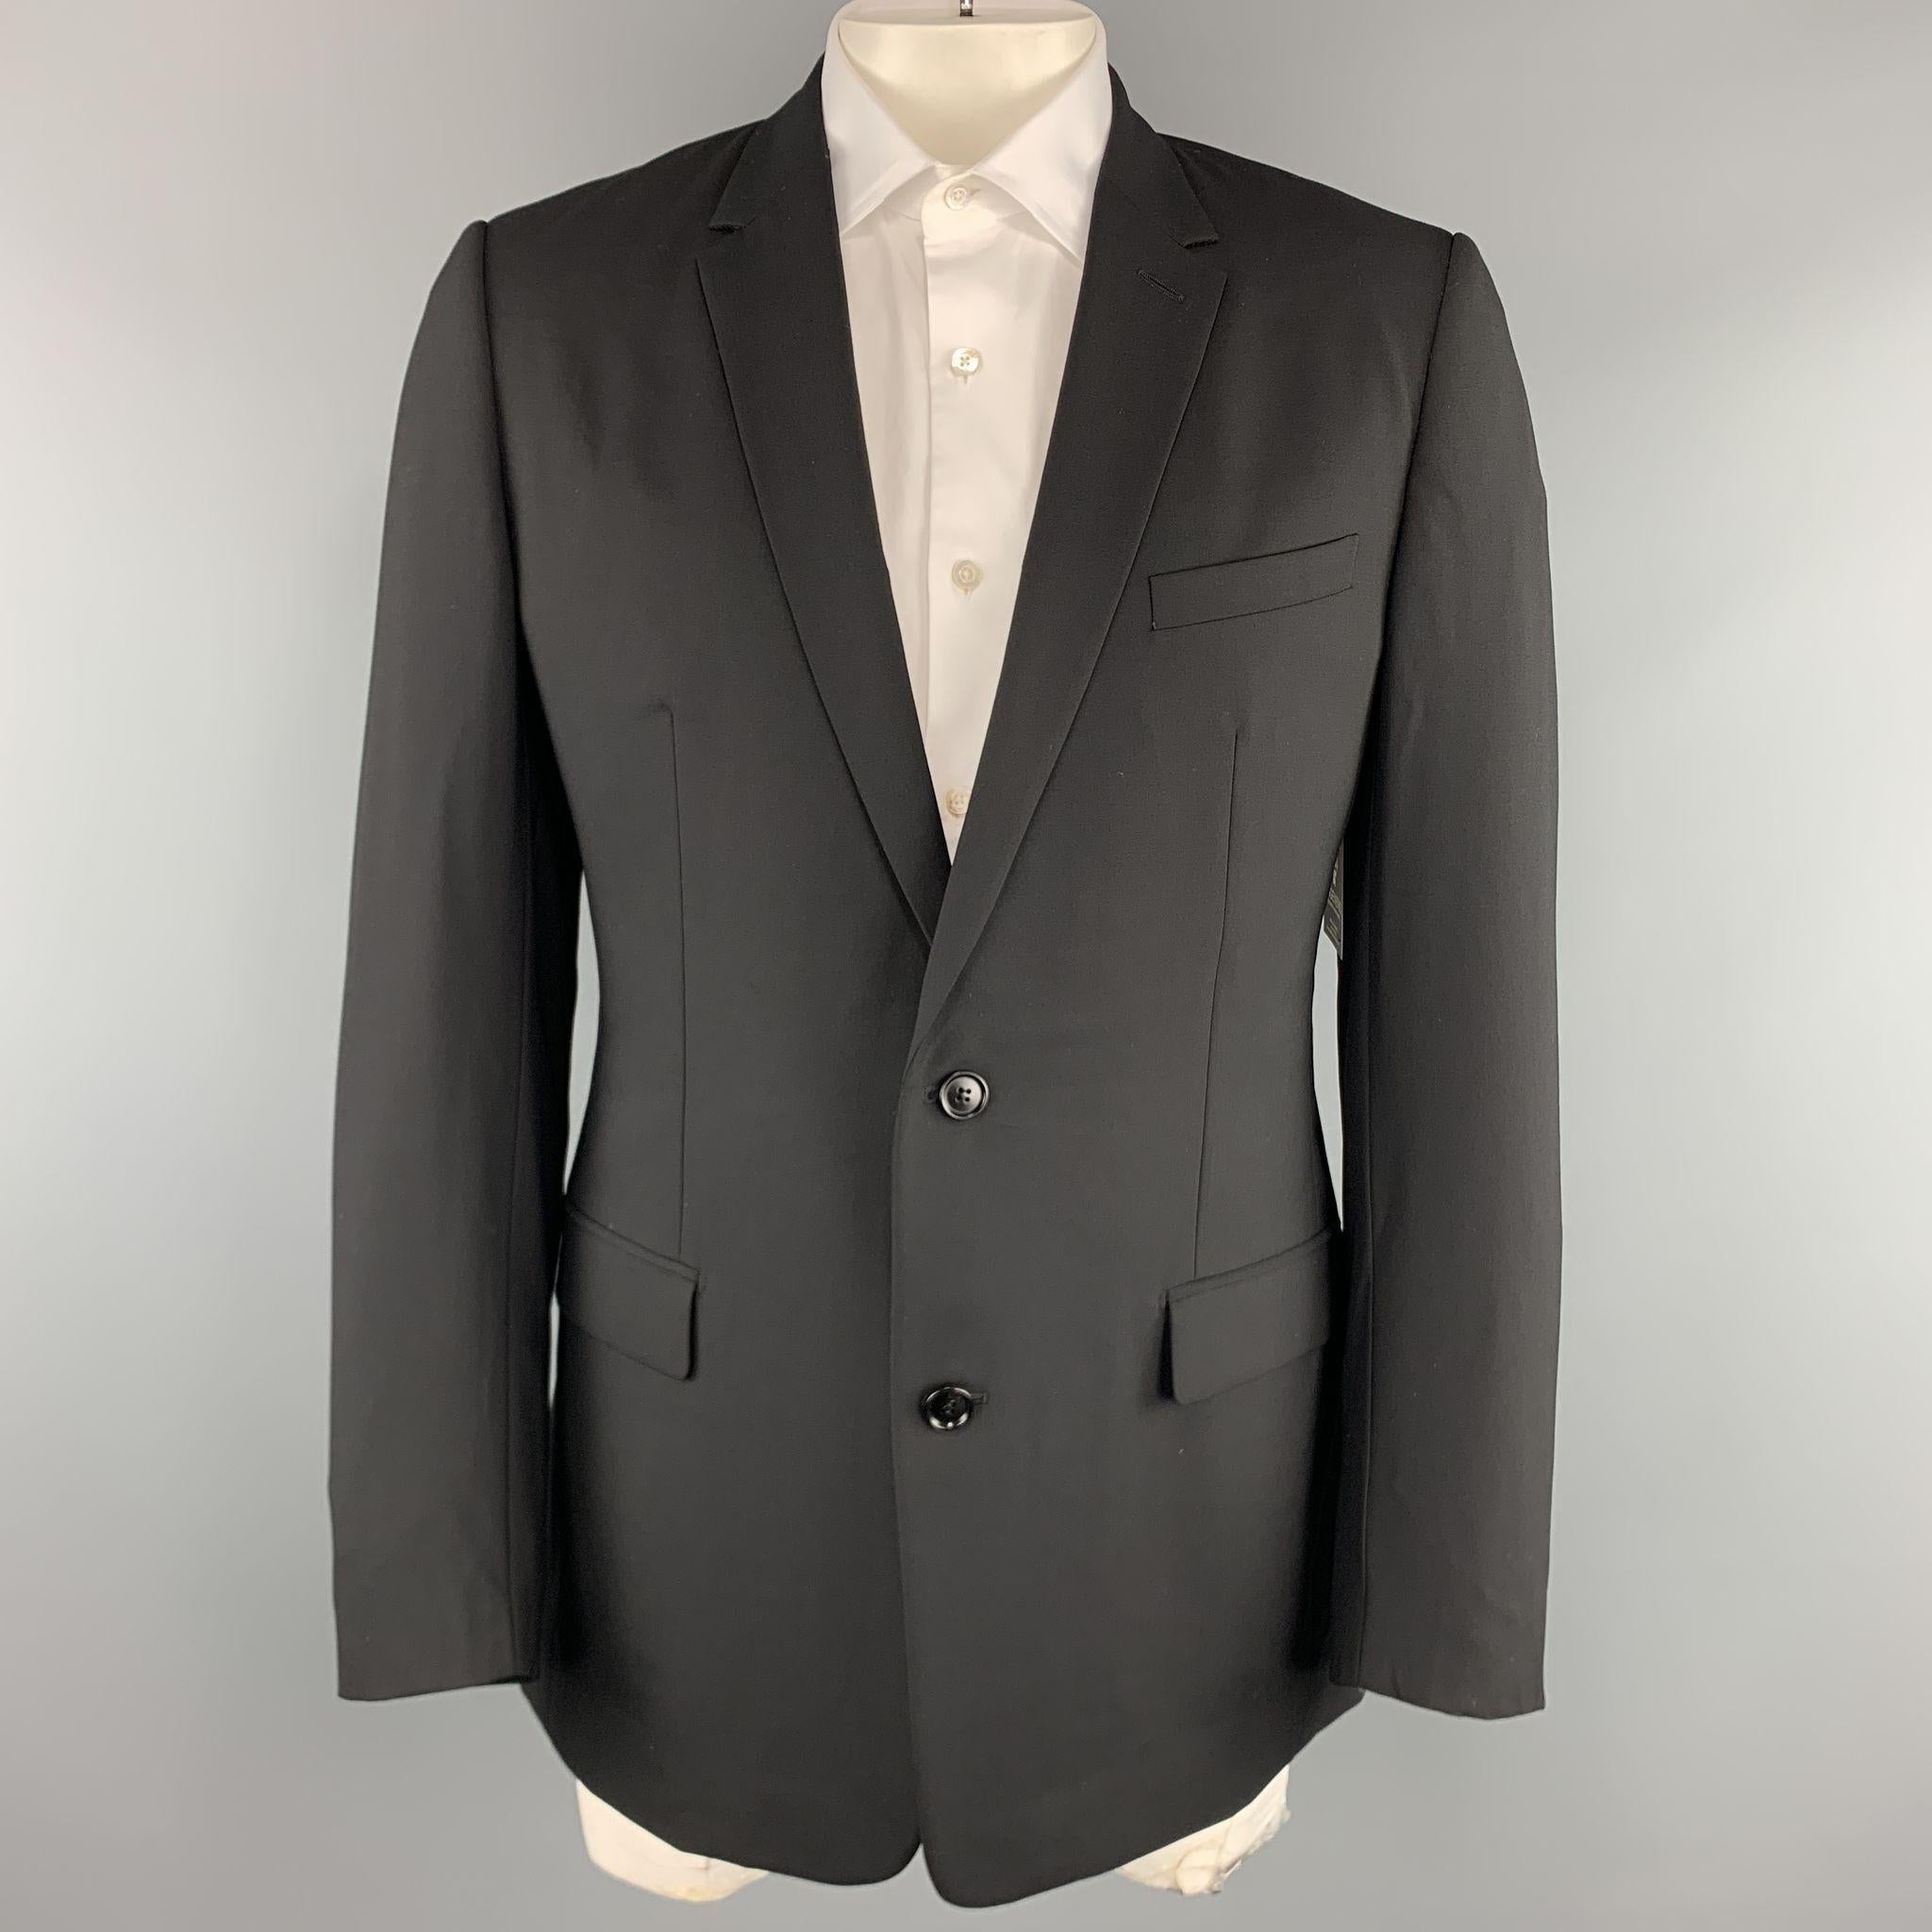 DIOR HOMME suit comes in black virgin wool and includes a single breasted, two button sport coat with a notch lapel and matching flat front trousers. Made in Italy.

Excellent Pre-Owned Condition.
Marked: IT 54 R

Measurements:

-Jacket
Shoulder: 17